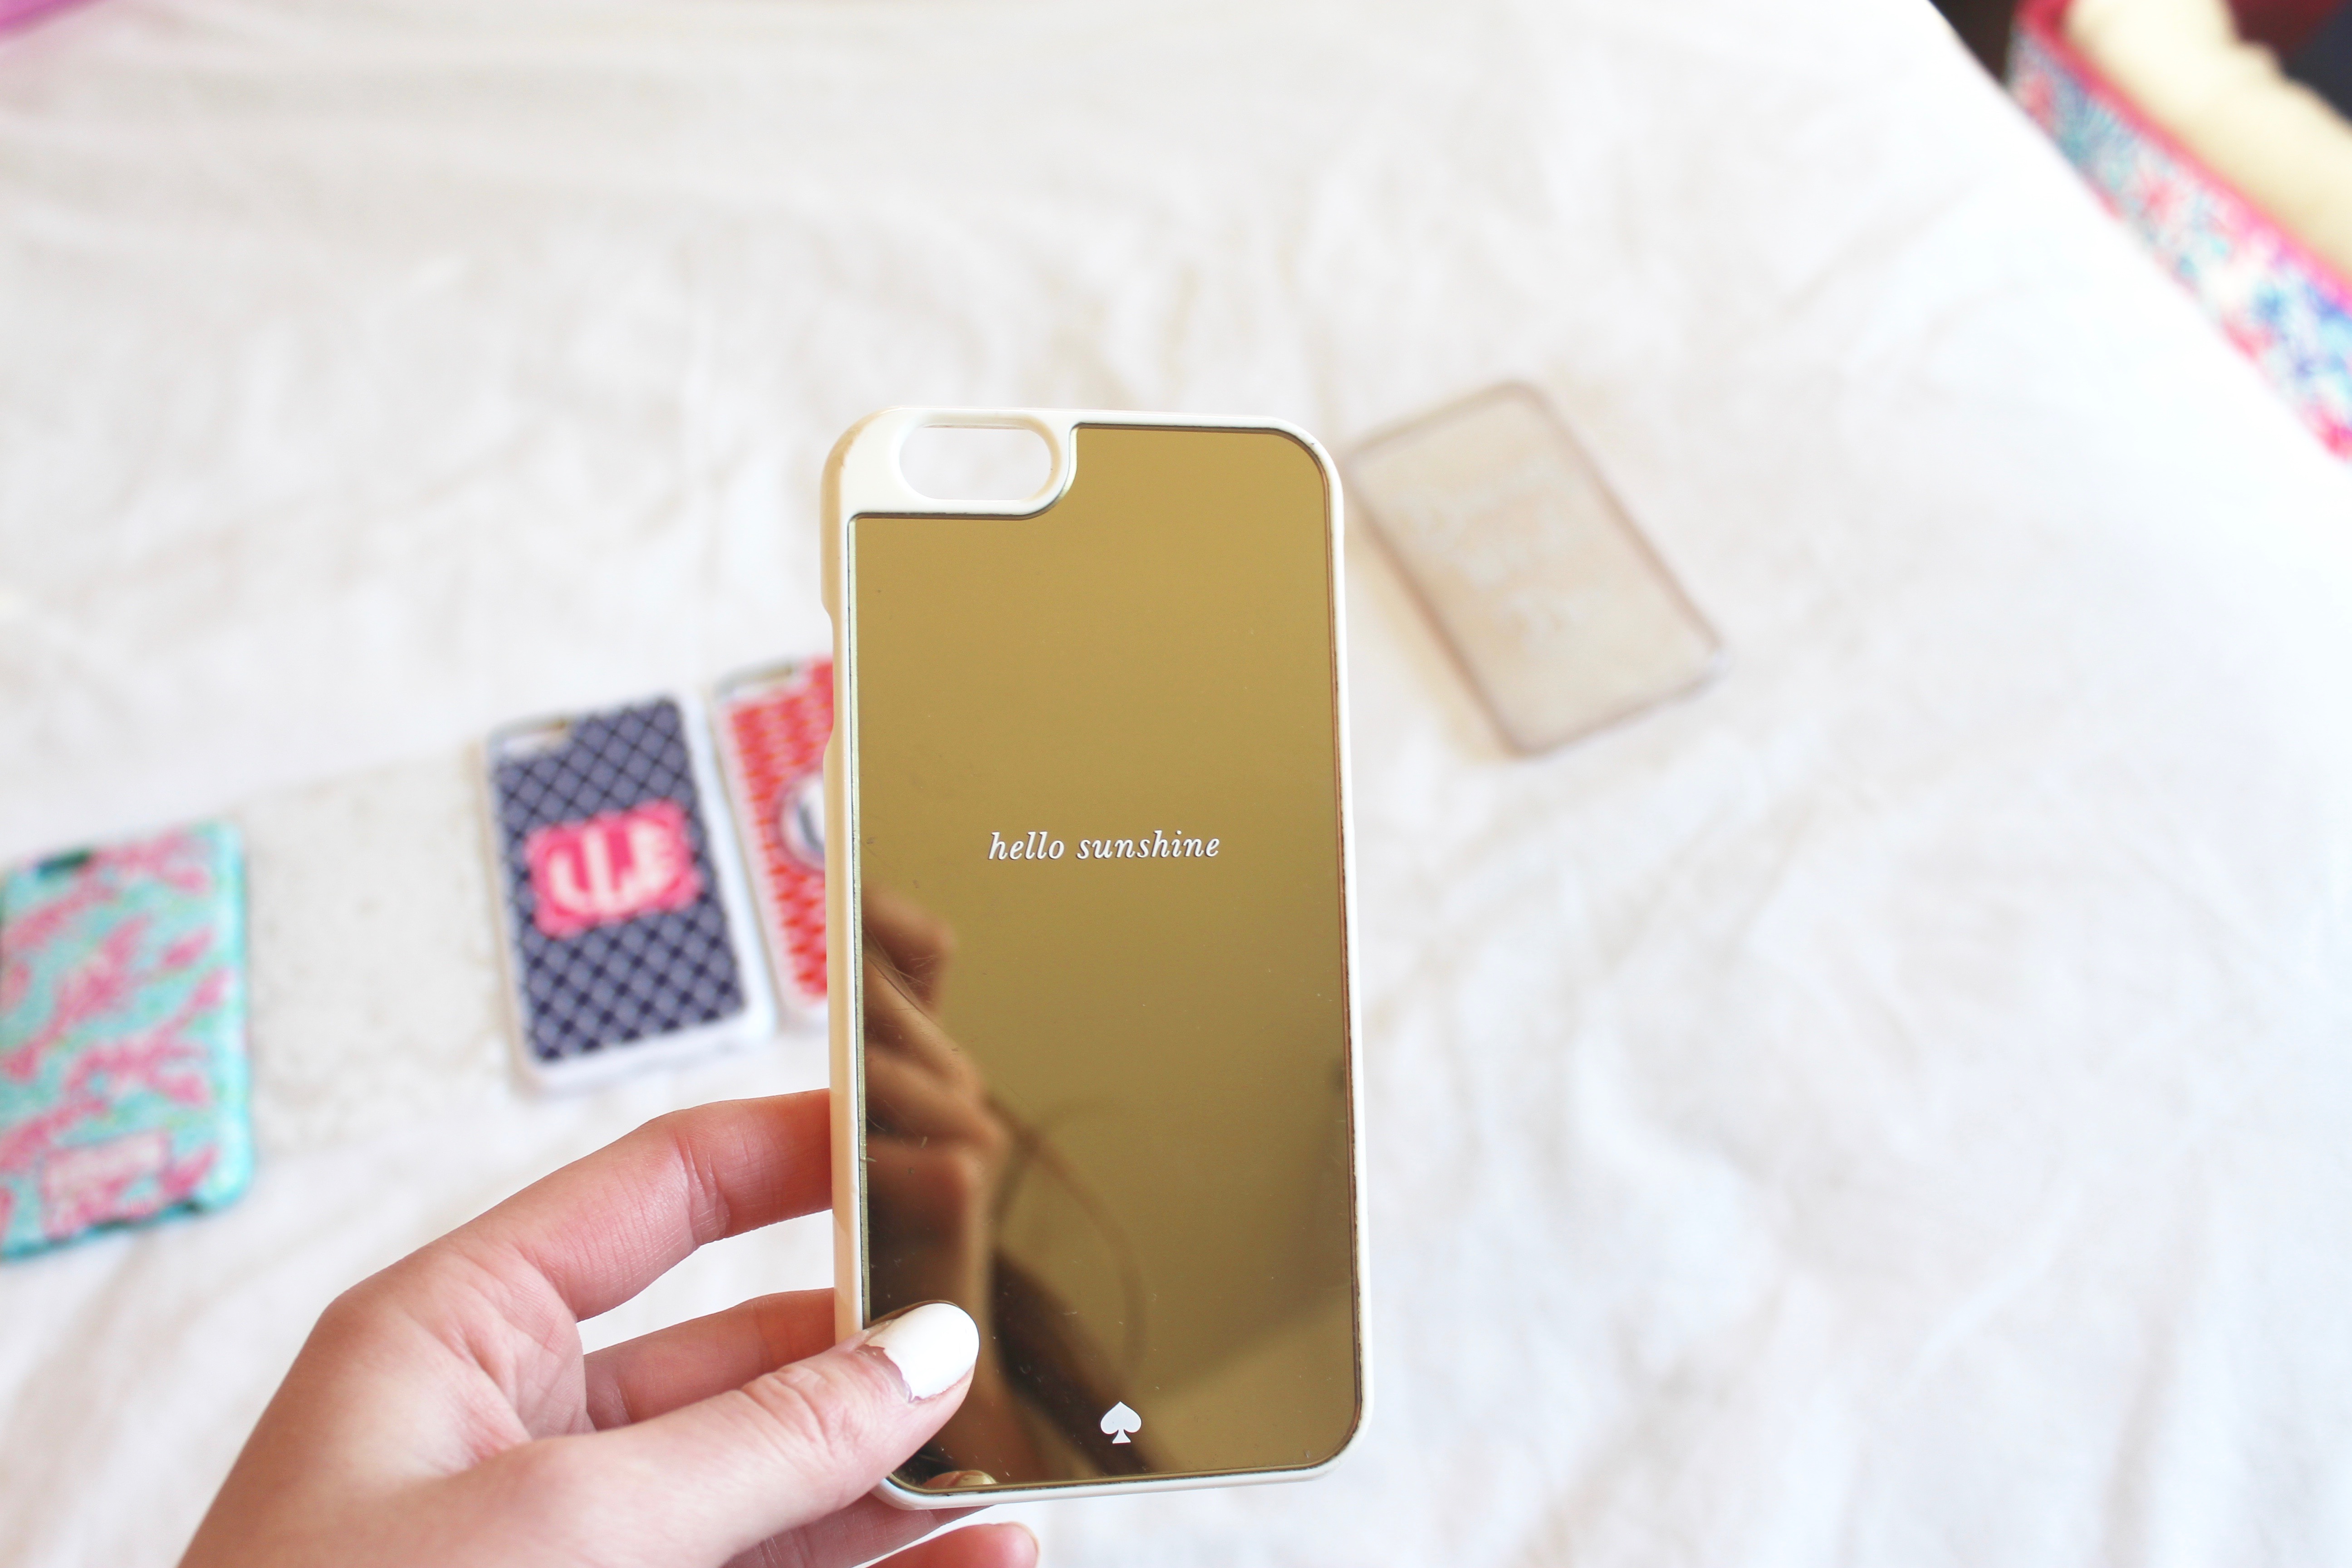 iPhone 6/6s Phone Case Haul | What Cases I'm loving! by Lauren Lindmark on Daily Dose of Charm